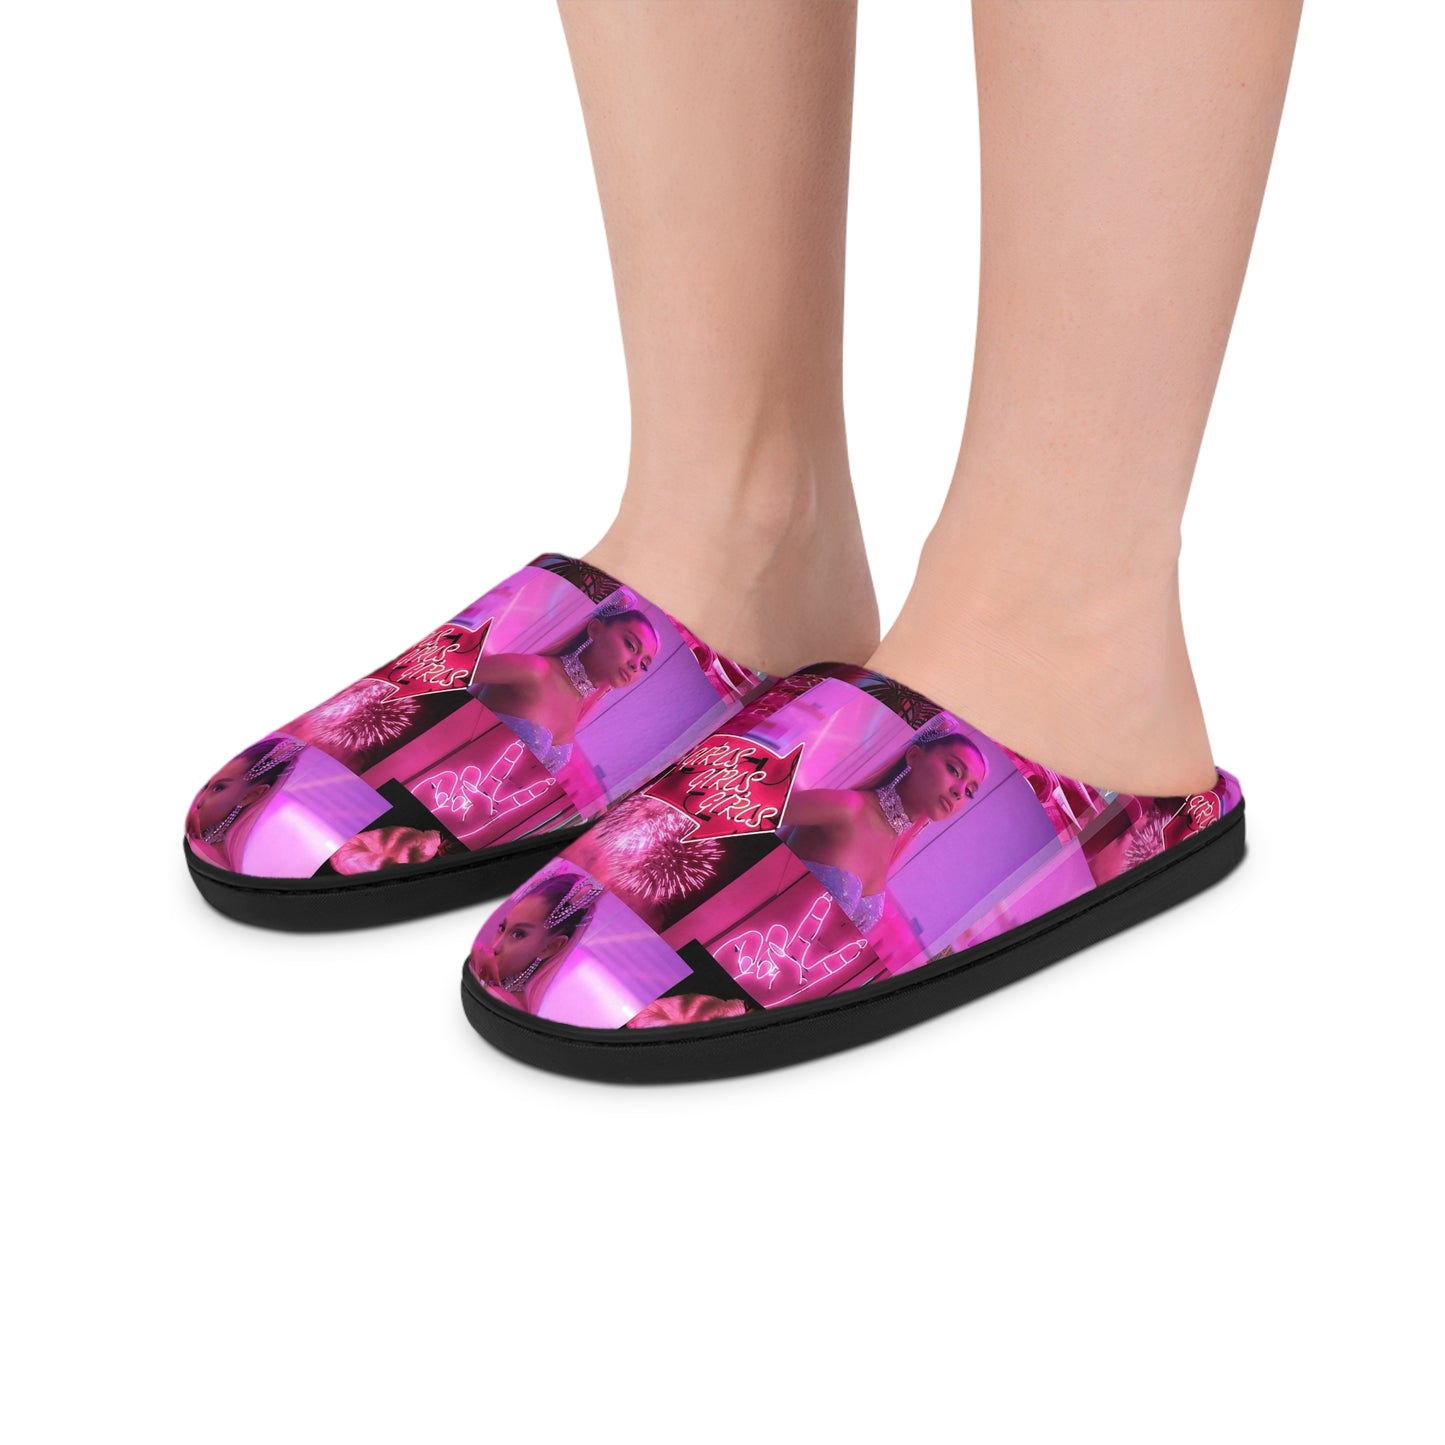 Ariana Grande 7 Rings Collage Women's Indoor Slippers